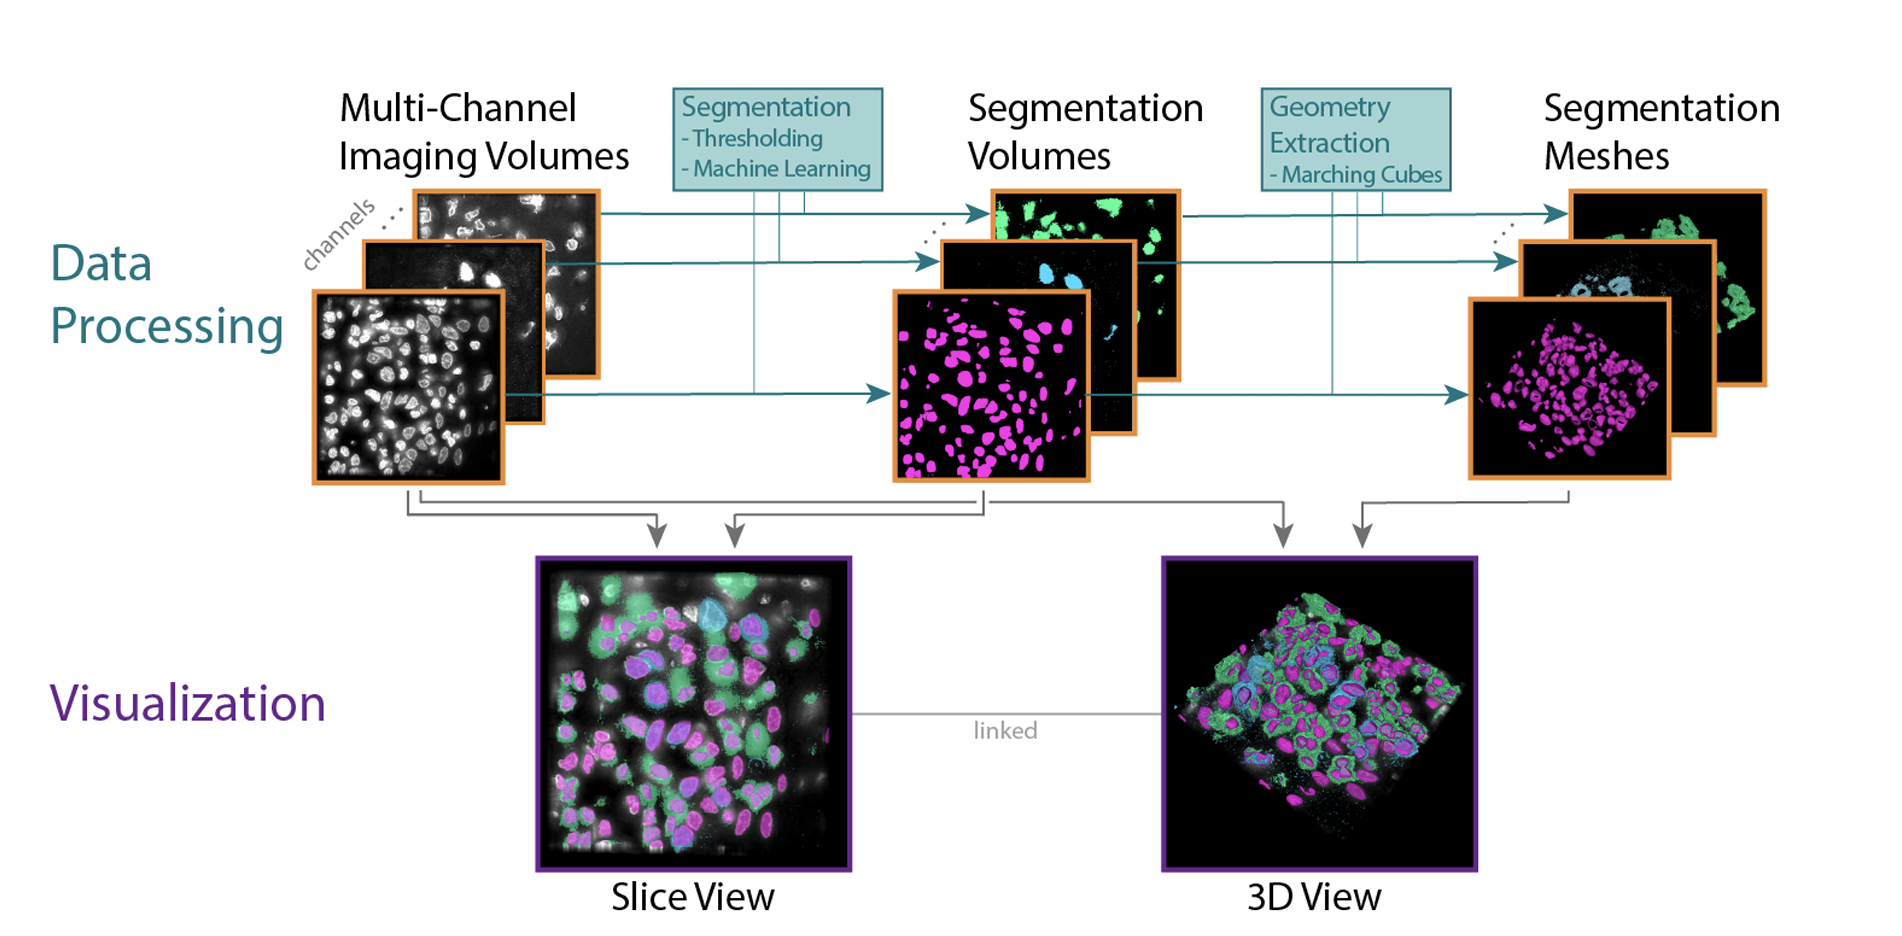 Addressing persistent challenges in digital image analysis of cancerous tissues